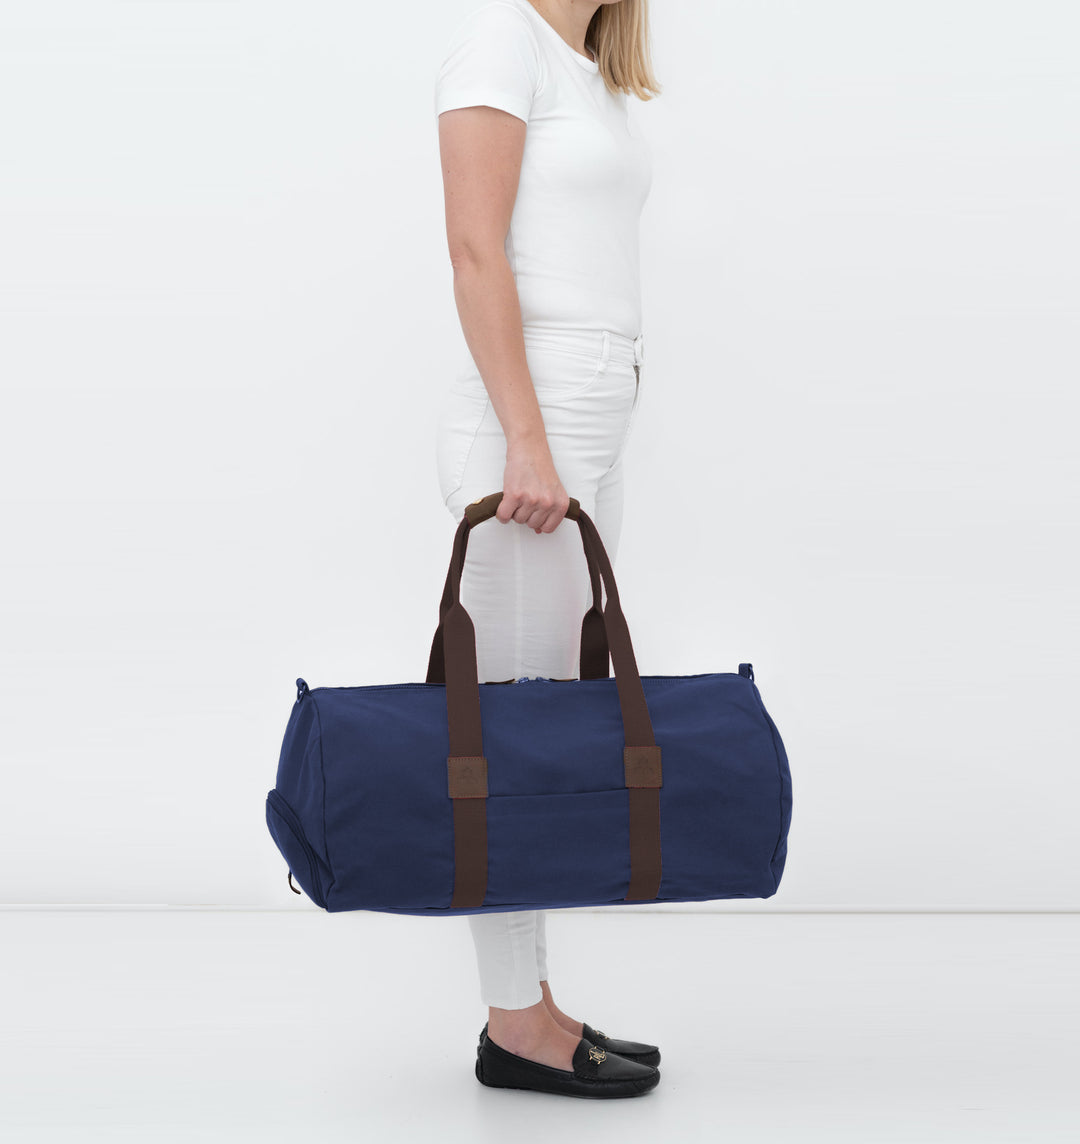 Duffle bag -M- NAVY with brown strap